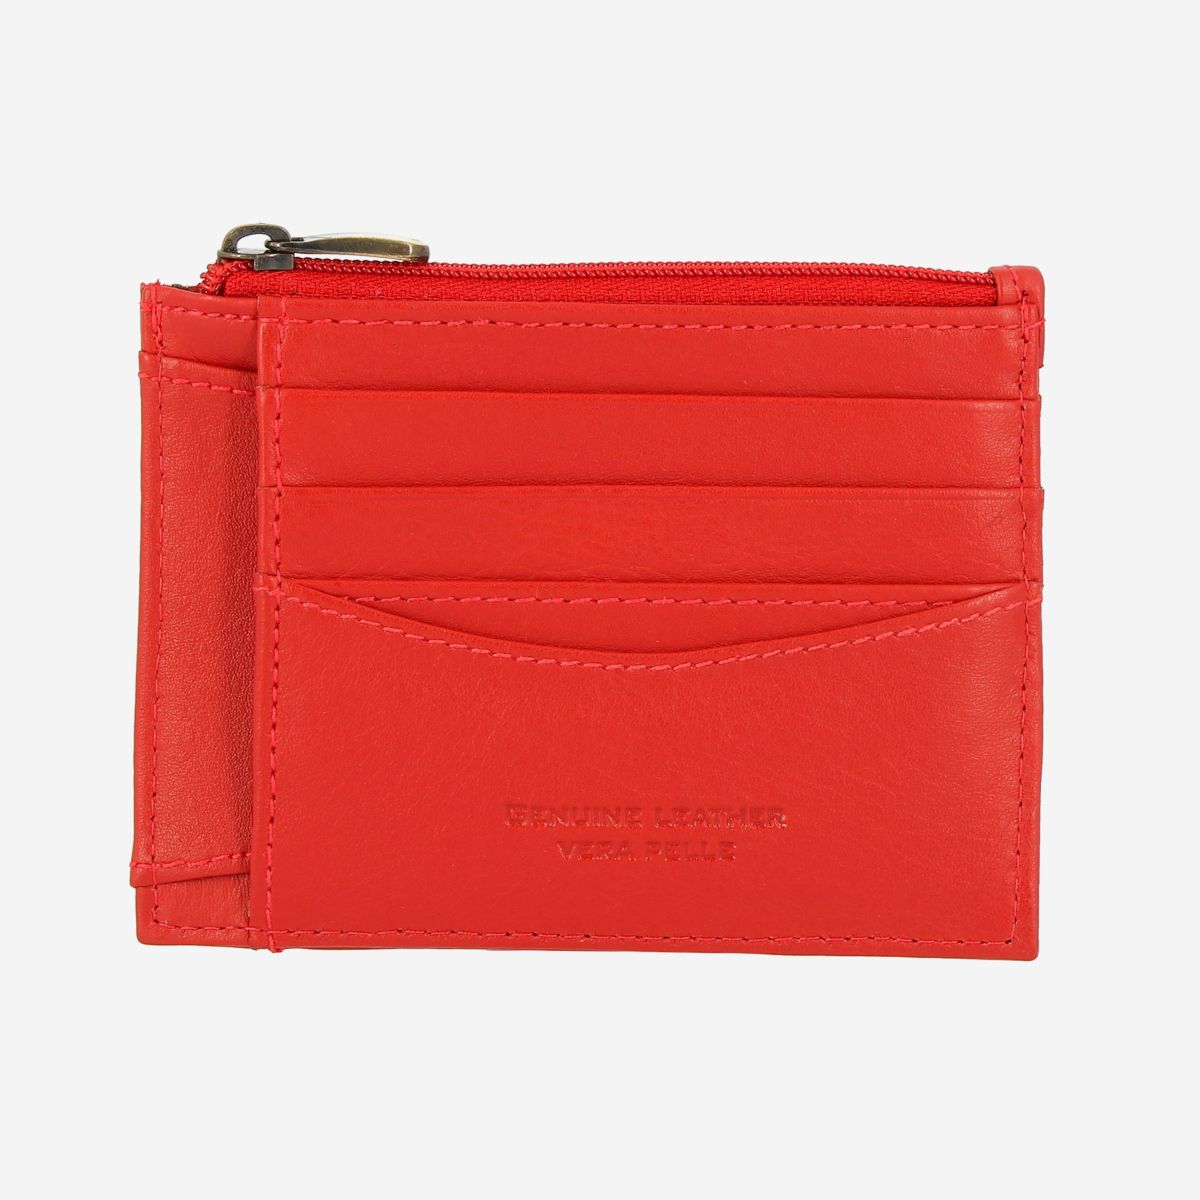 NUVOLA PELLE Slim Leather Credit Card Wallet - Red